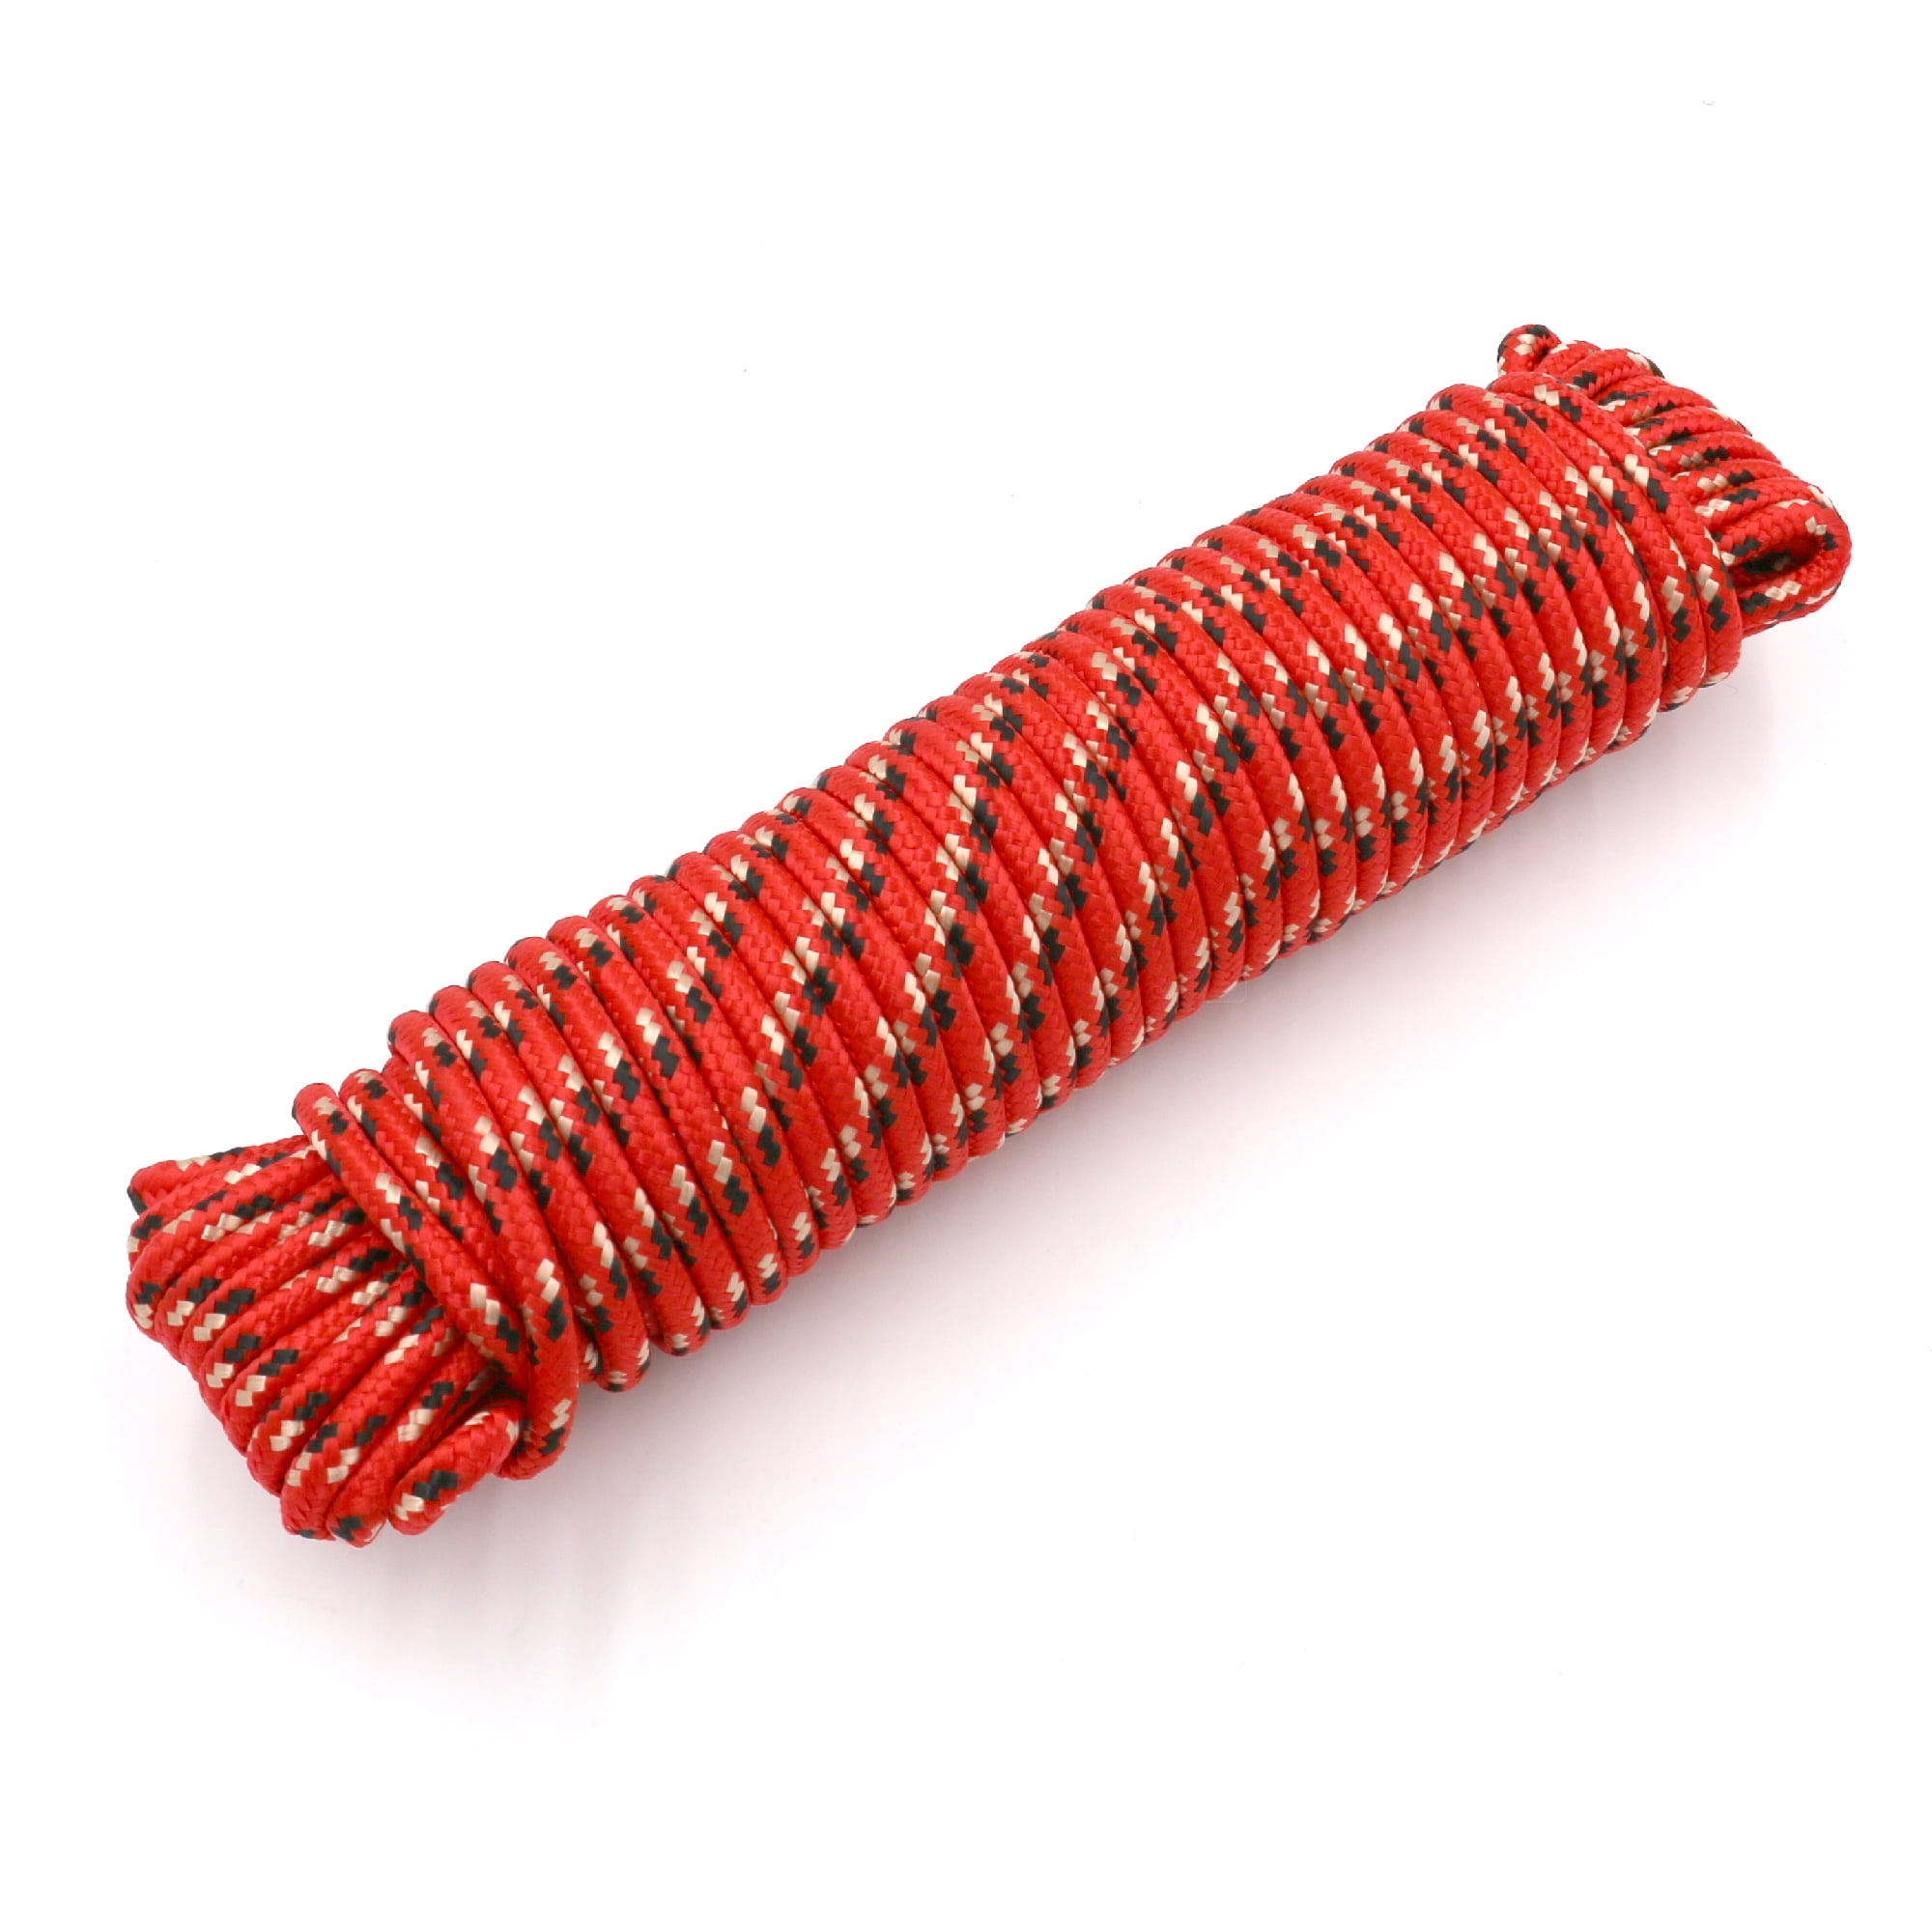 100ft Roll of Firetoys Braided Fire Rope 3/8 (10mm)